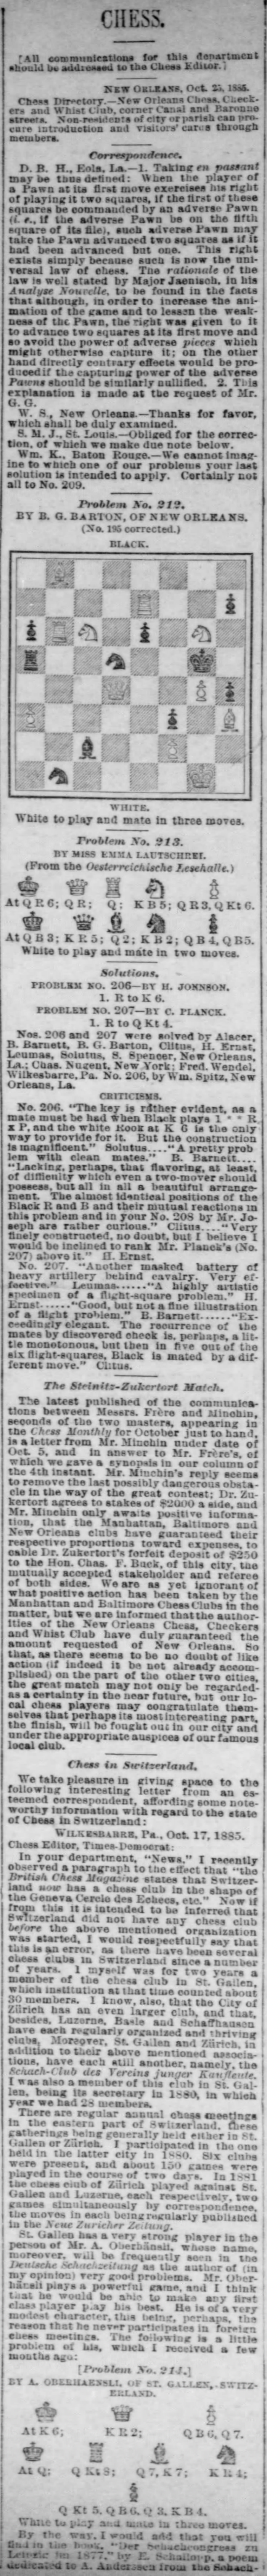 1885.10.31-01 New Orleans Weekly Times-Democrat.png